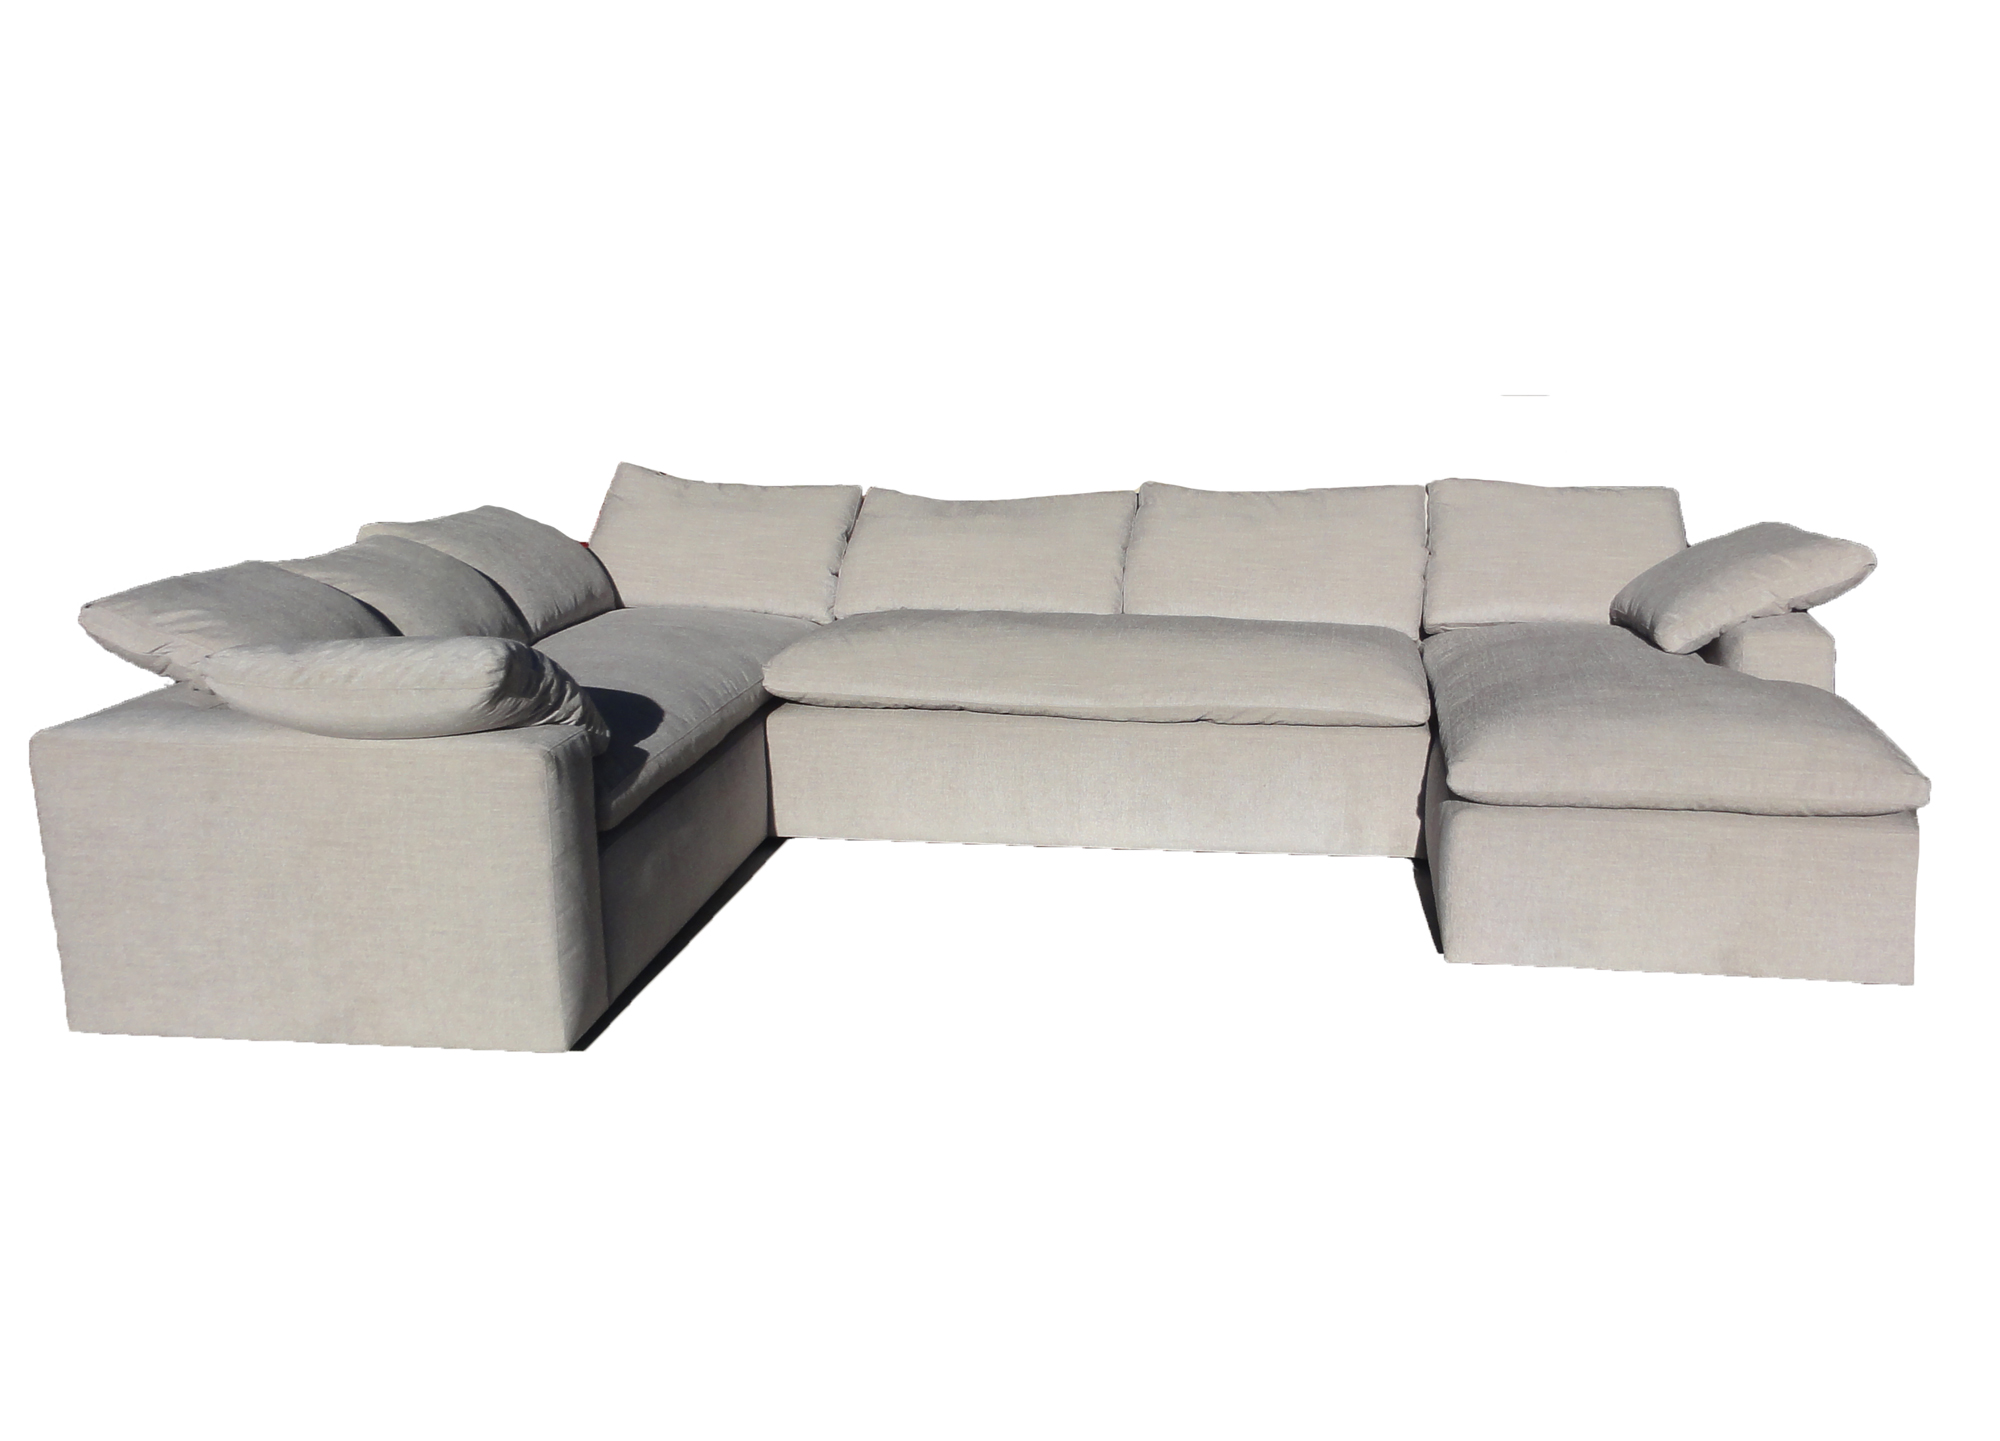 Cyrus Sectional